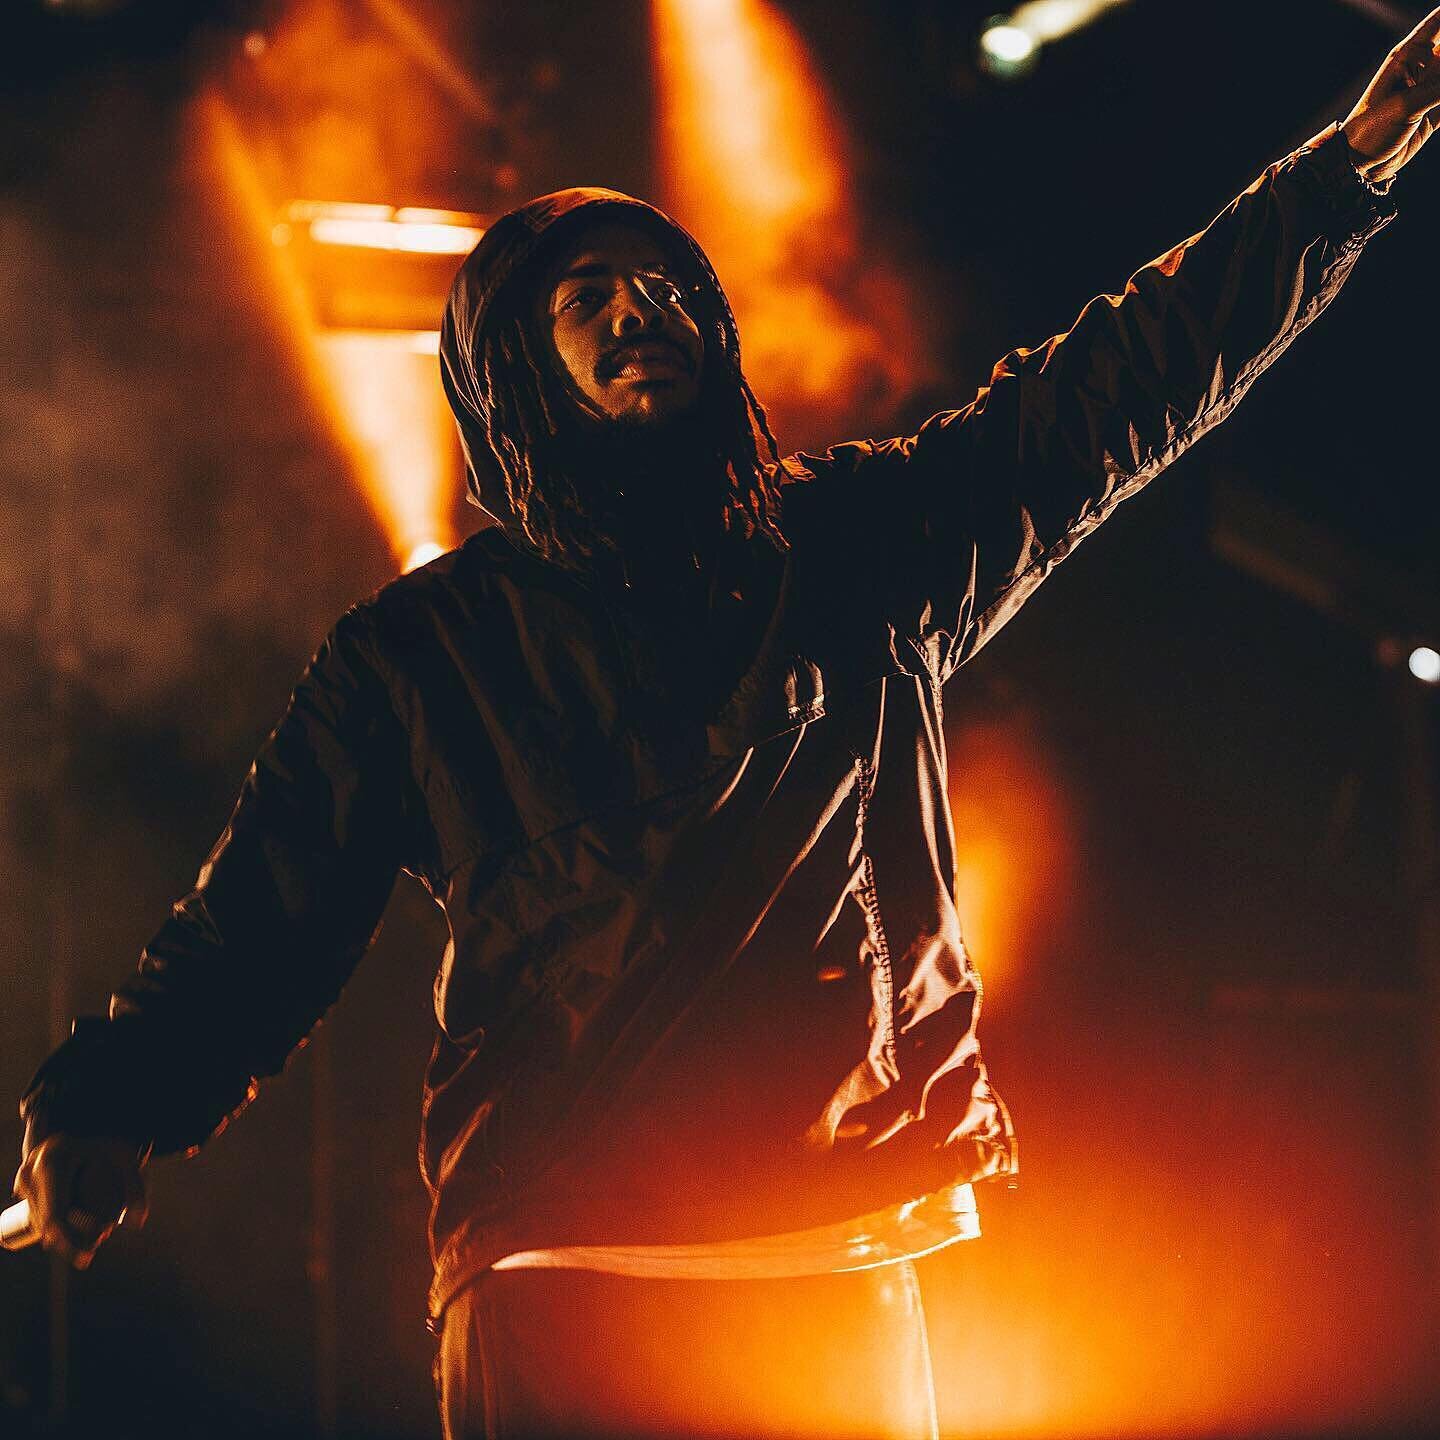 @soapmanwun at @parklife_festival 2019

Prints available in 6x4, A4 &amp; A3 🖼 

#earlsweatshirt #feetofclay #somerapsongs #warnerrecords #parklifefestival #parklife #manchester #heatonpark #musicprints #livemusicphotography #festivalphotography